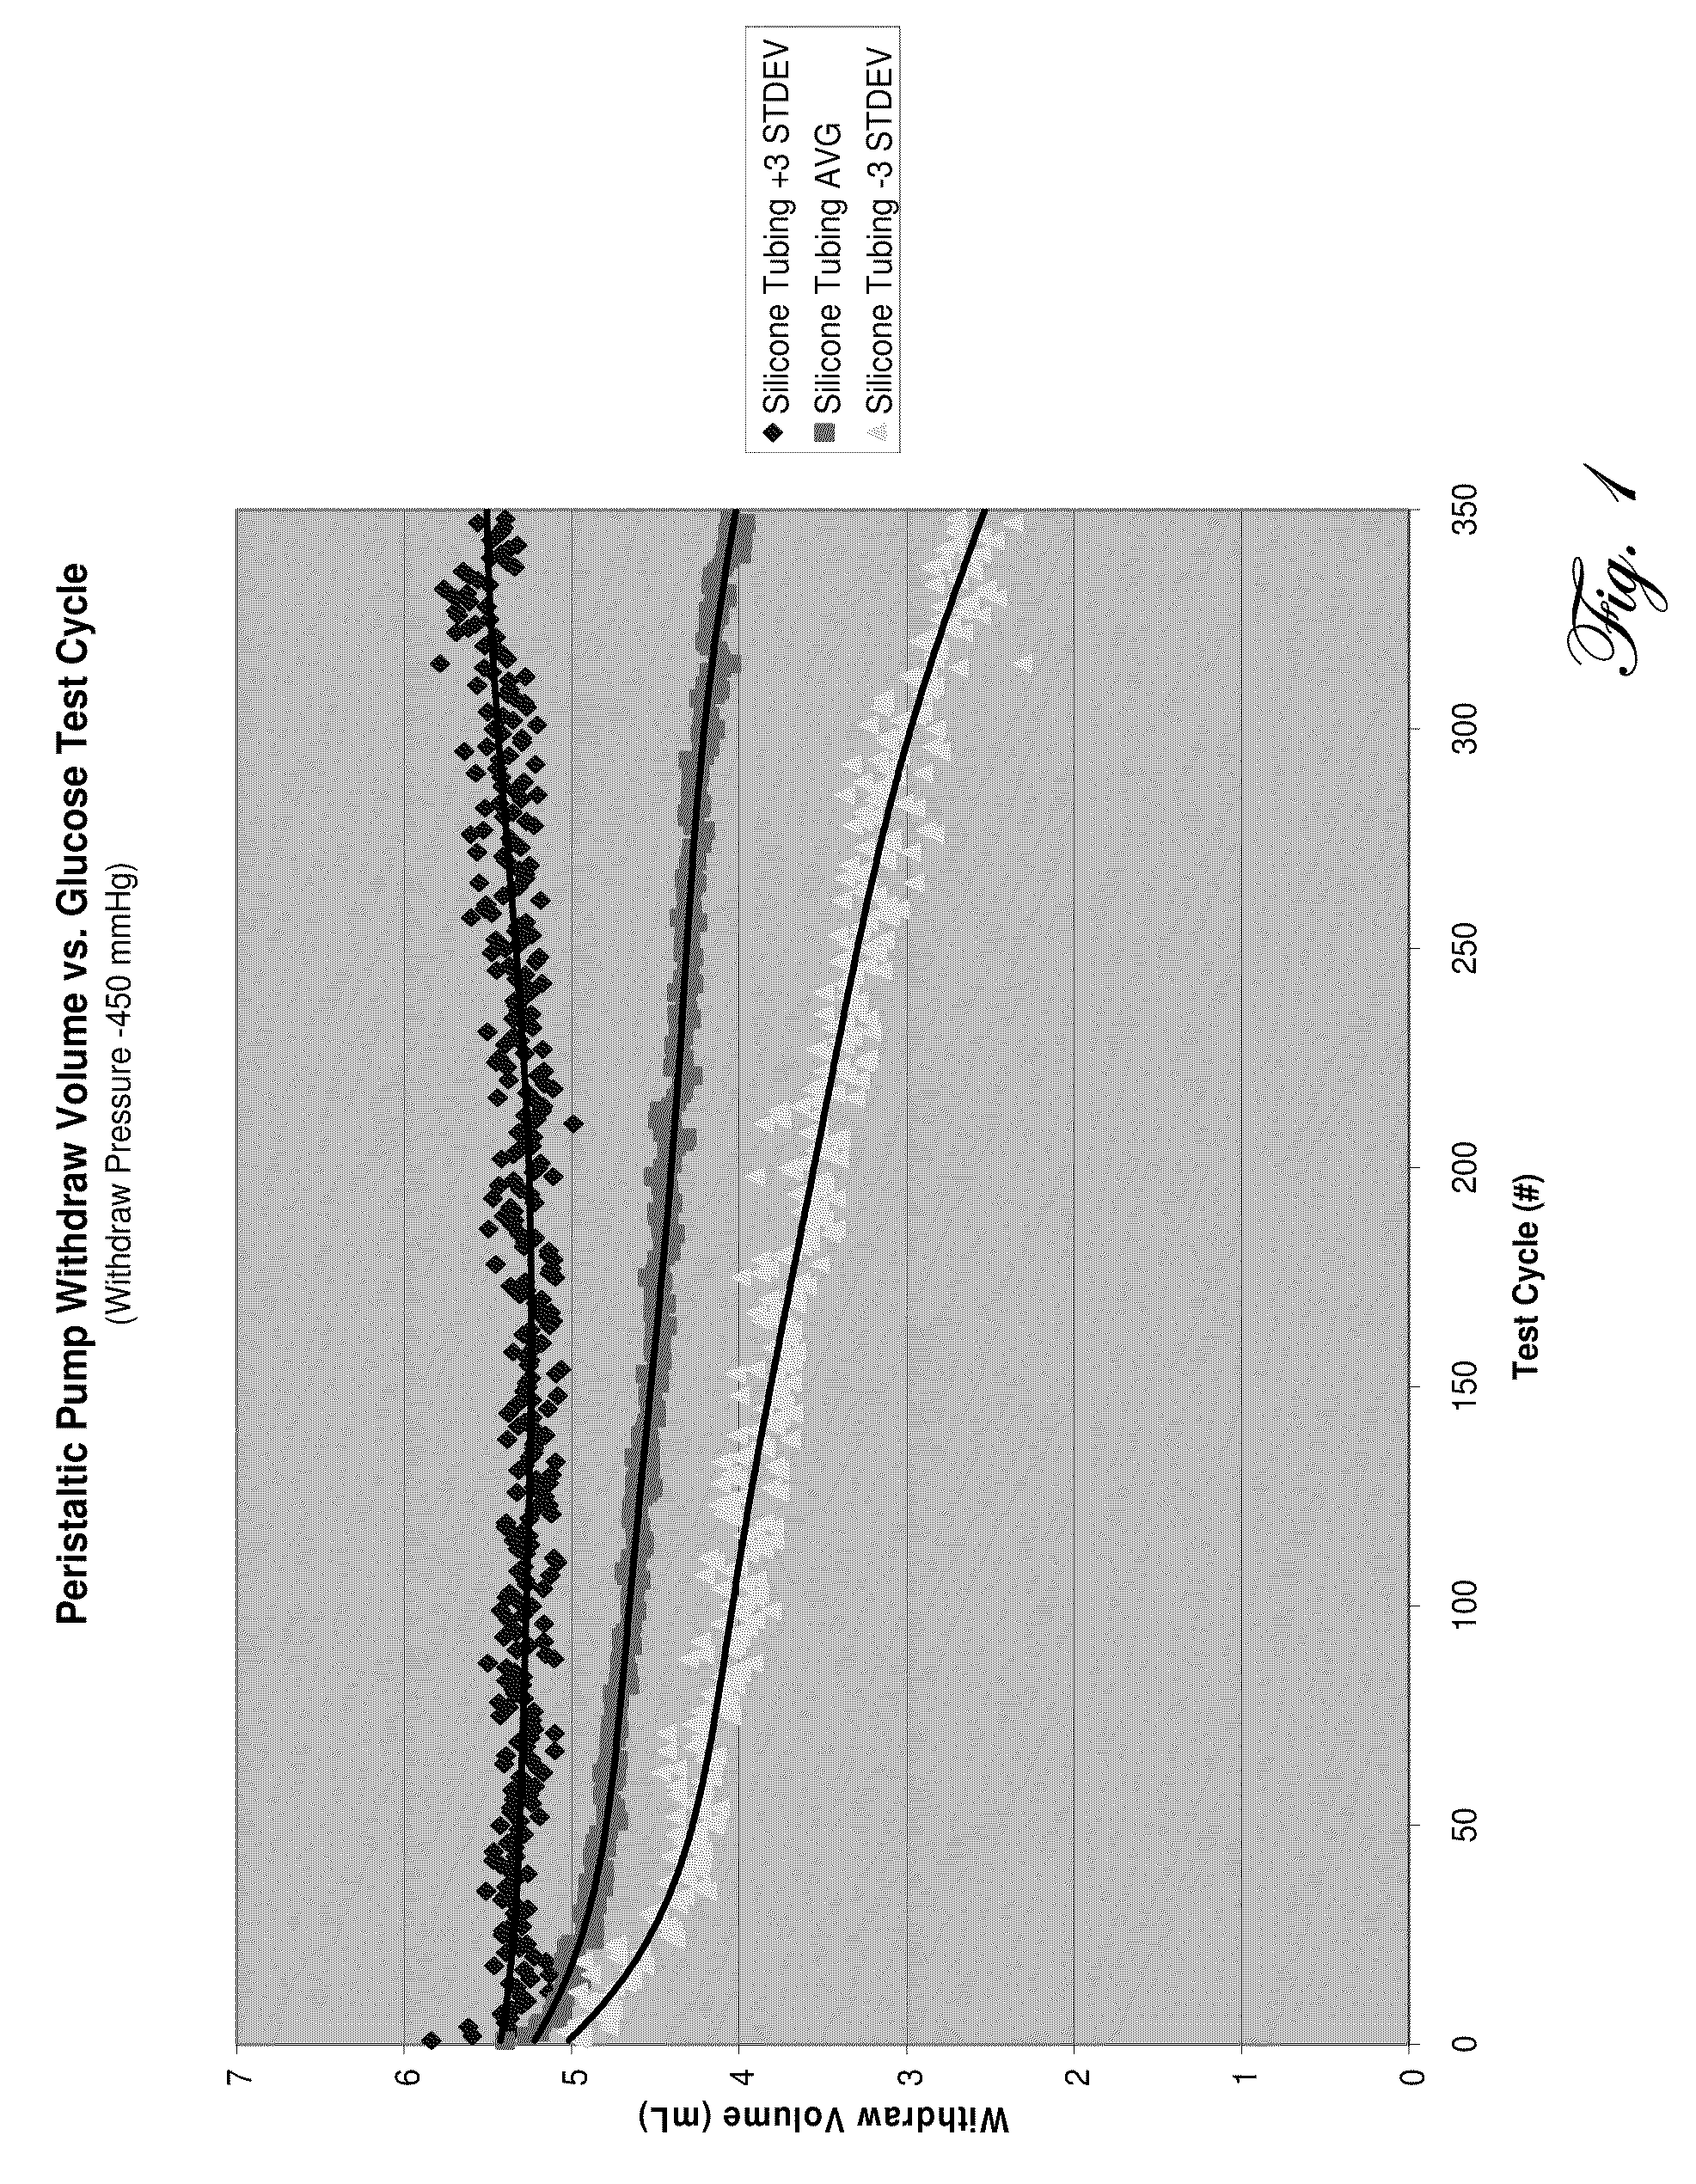 Determination of blood pump system performance and sample dilution using a property of fluid being transported